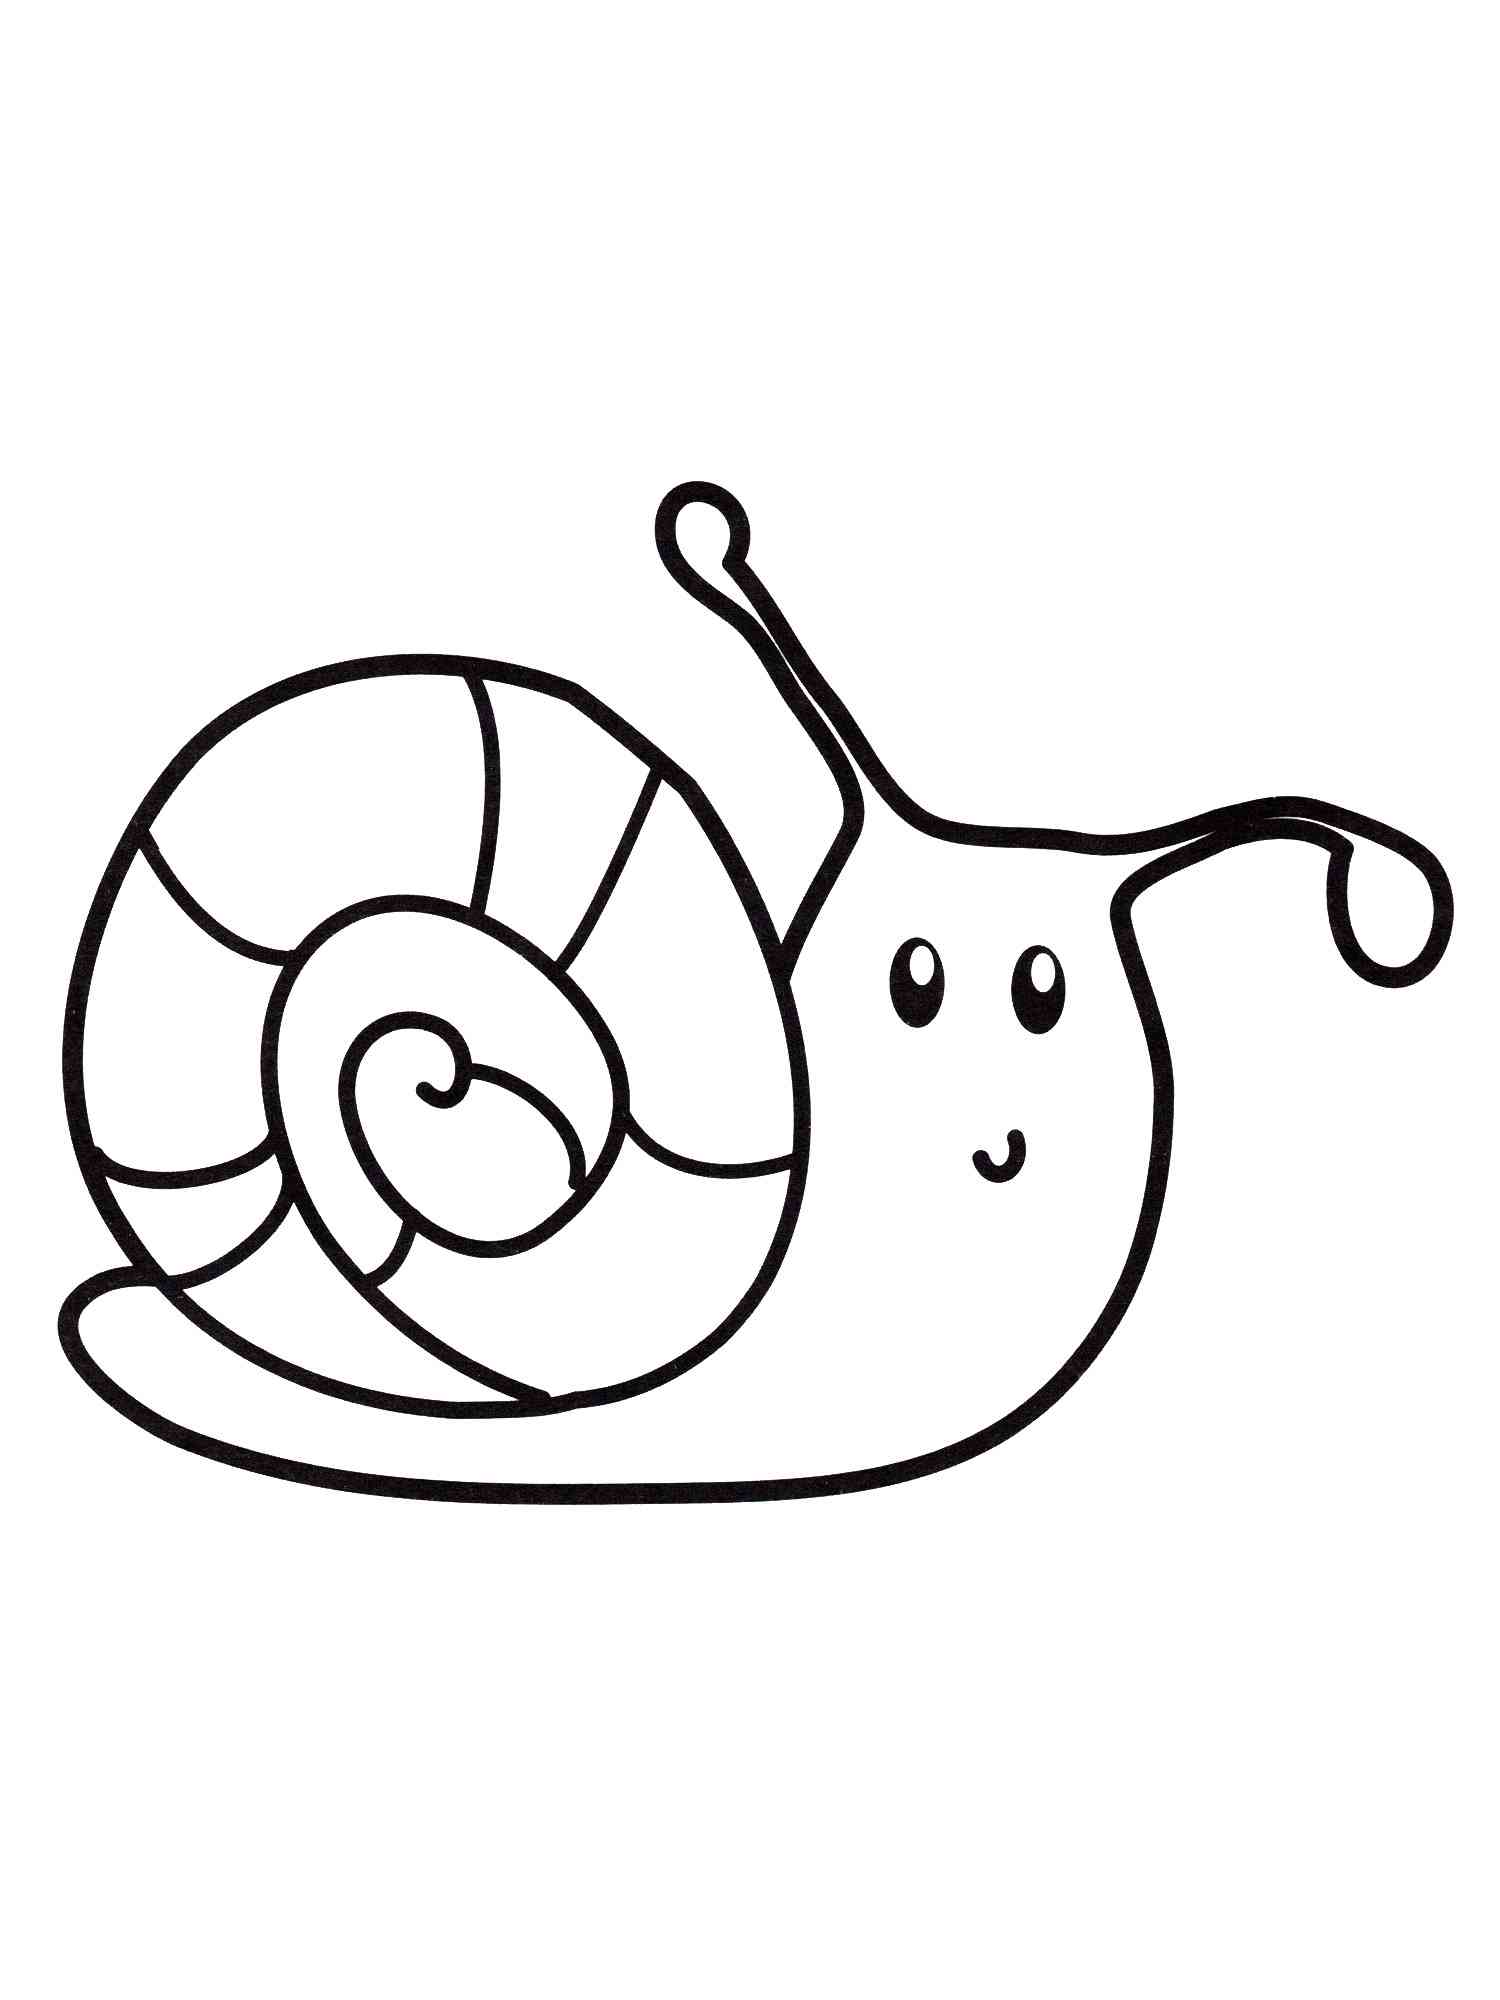 Simple Little Snail coloring page